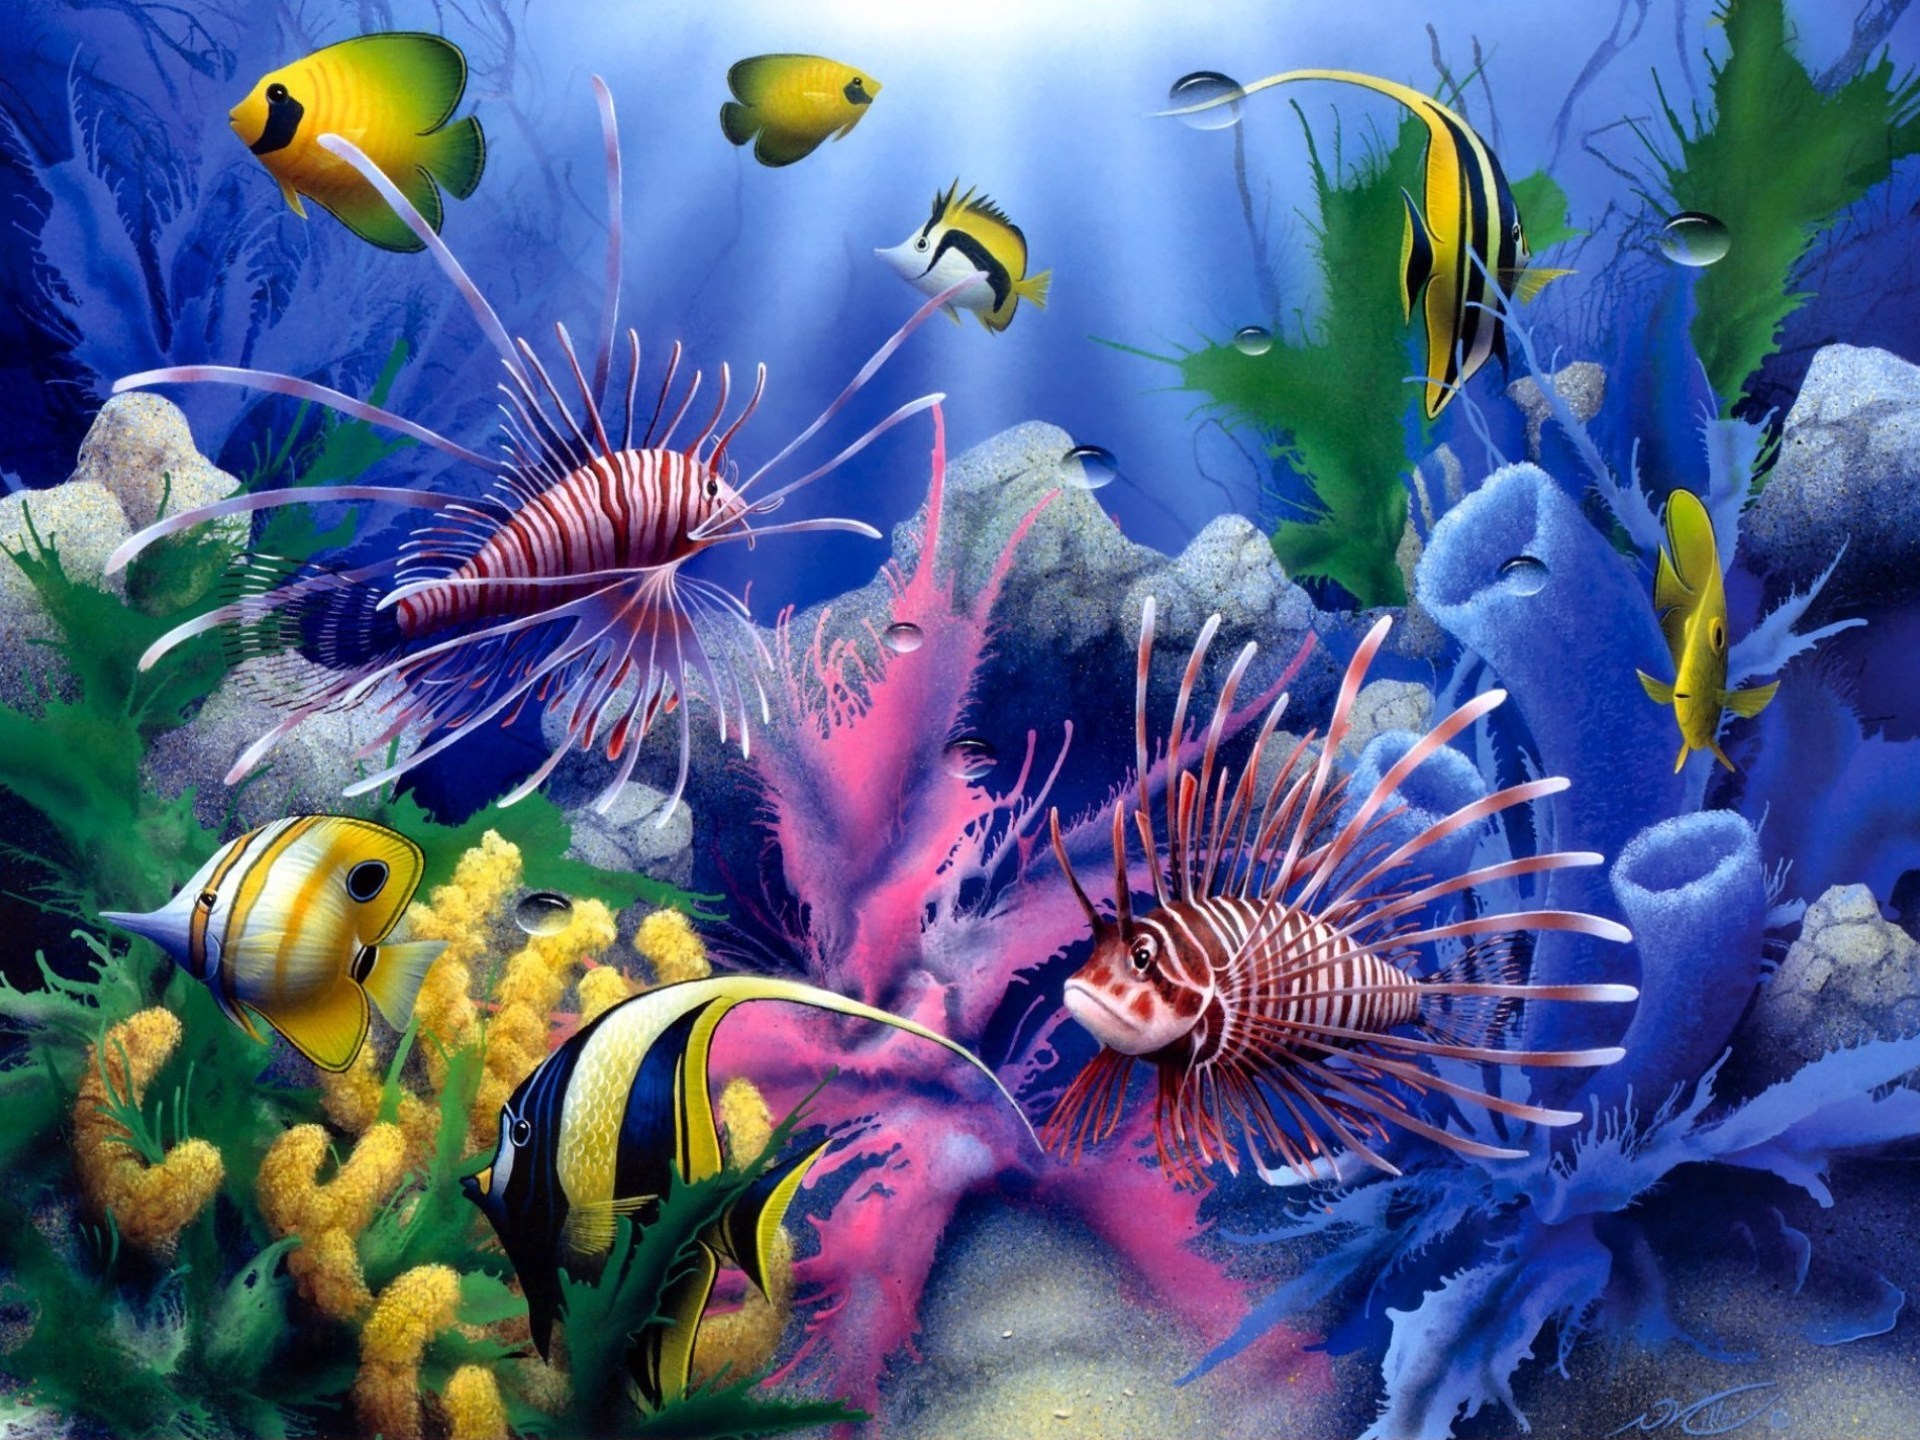 lions, Of, The, Sea, David, Miller, Painting, Art, Animals, Fishes, Tropical, Sealife, Life, Color, Underwater, Coral, Reef, Ocean, Sea, Sunlight Wallpaper